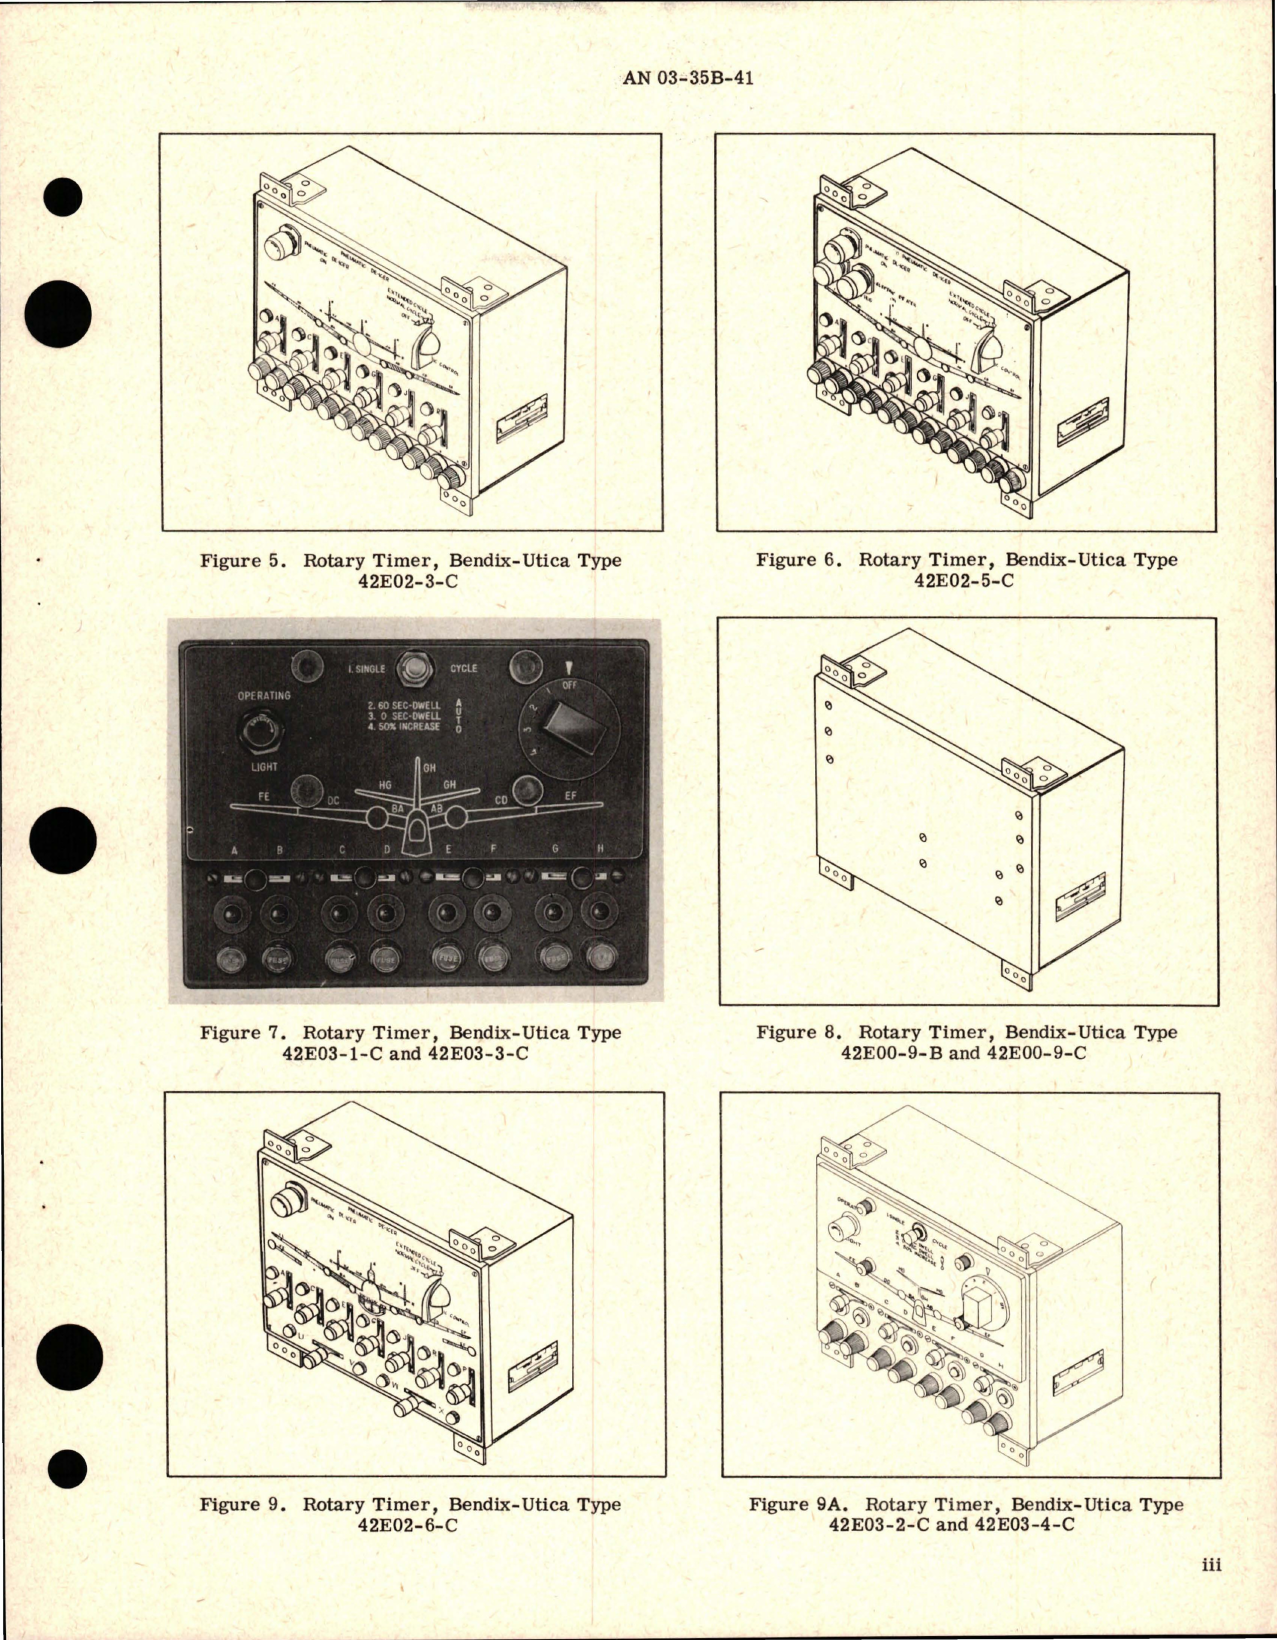 Sample page 5 from AirCorps Library document: Illustrated Parts Breakdown for Rotary Timers - Parts 42E00, 42E02, and 42E03 Series